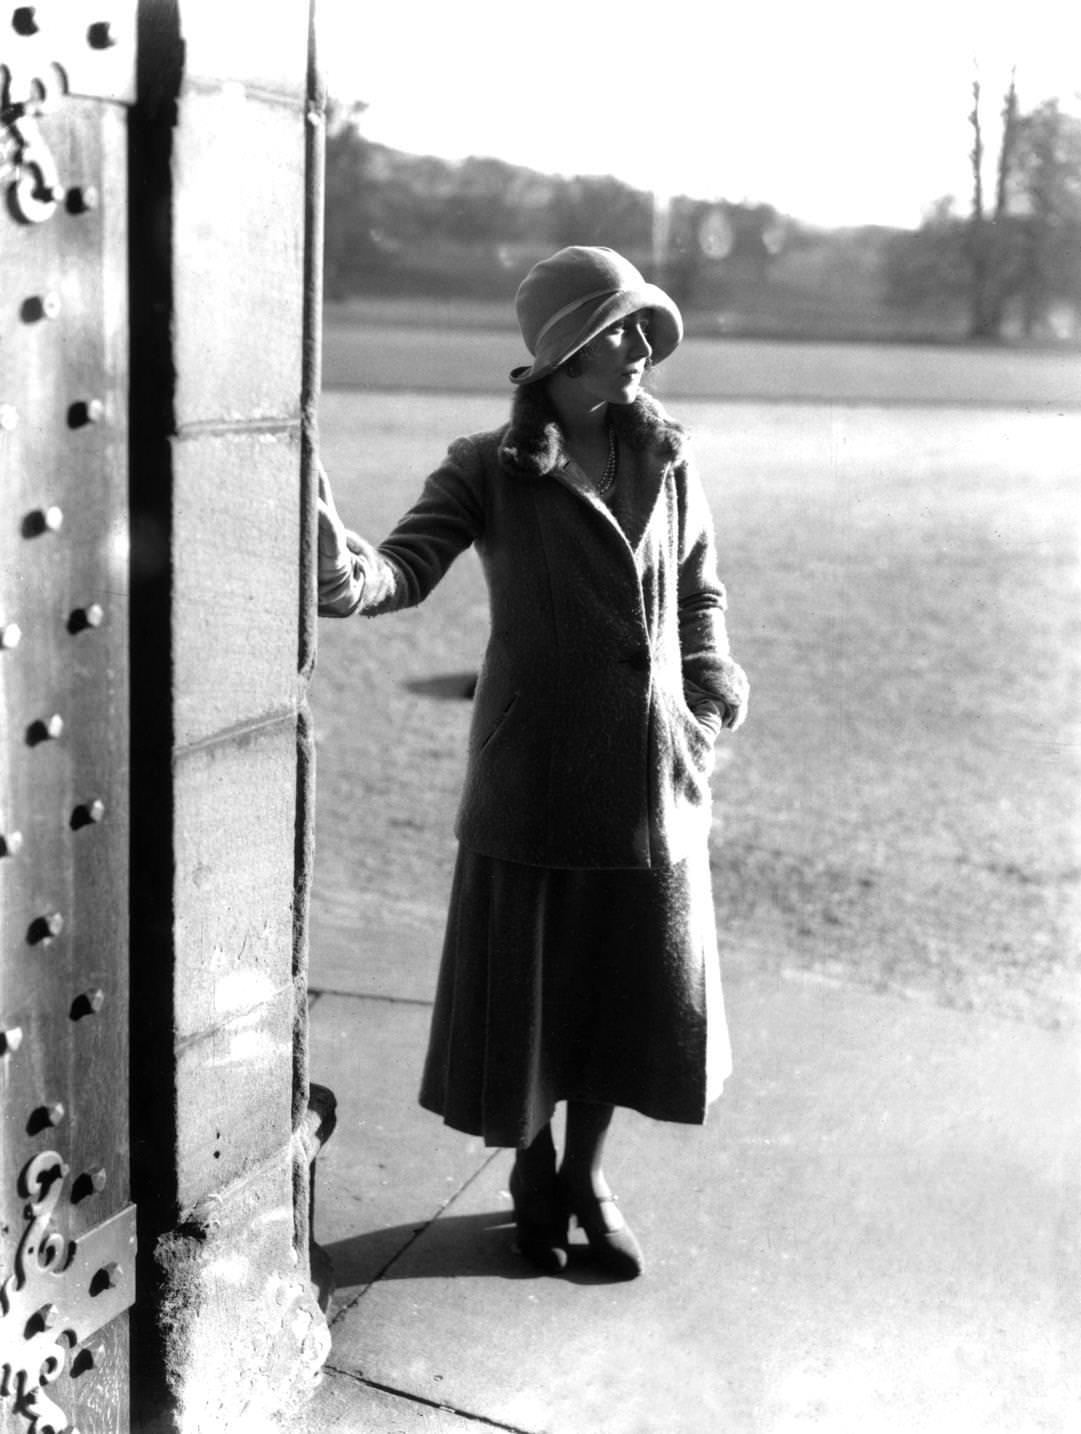 Future Queen Consort to King George VI, Lady Elizabeth Bowes-Lyon, at her childhood home Glamis Castle in Angus, 1923